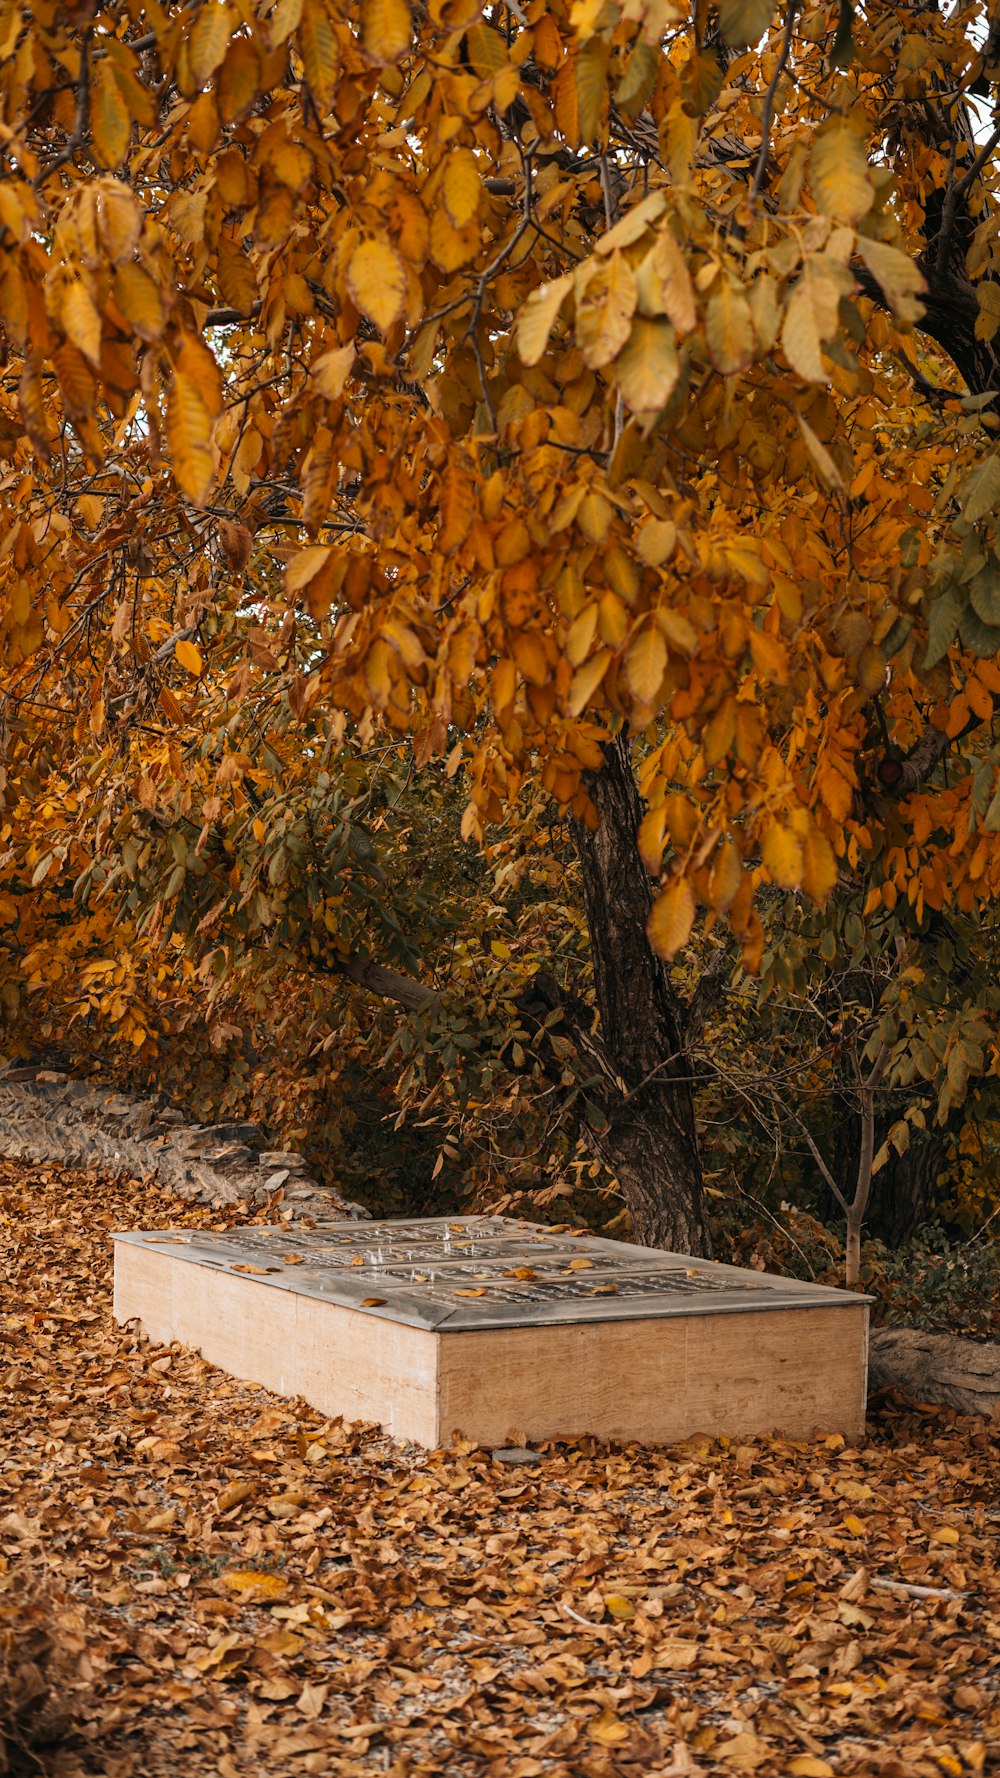 a wooden box sitting under a tree filled with leaves